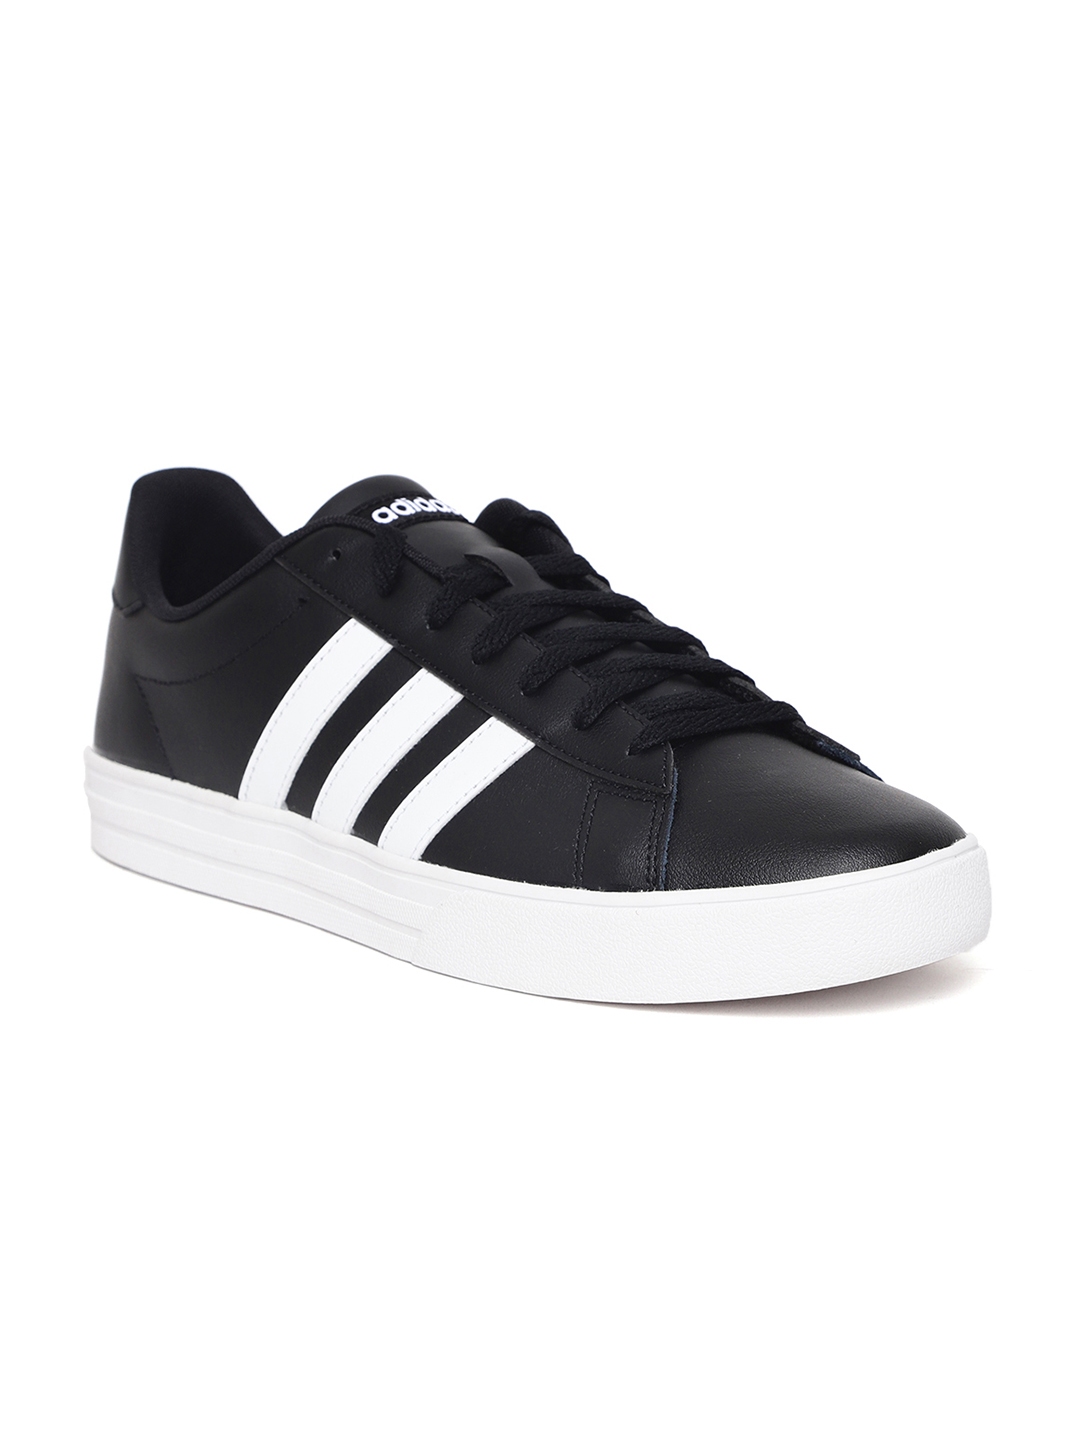 Buy ADIDAS Men Black Daily 2.0 Leather Basketball Shoes - Sports Shoes ...